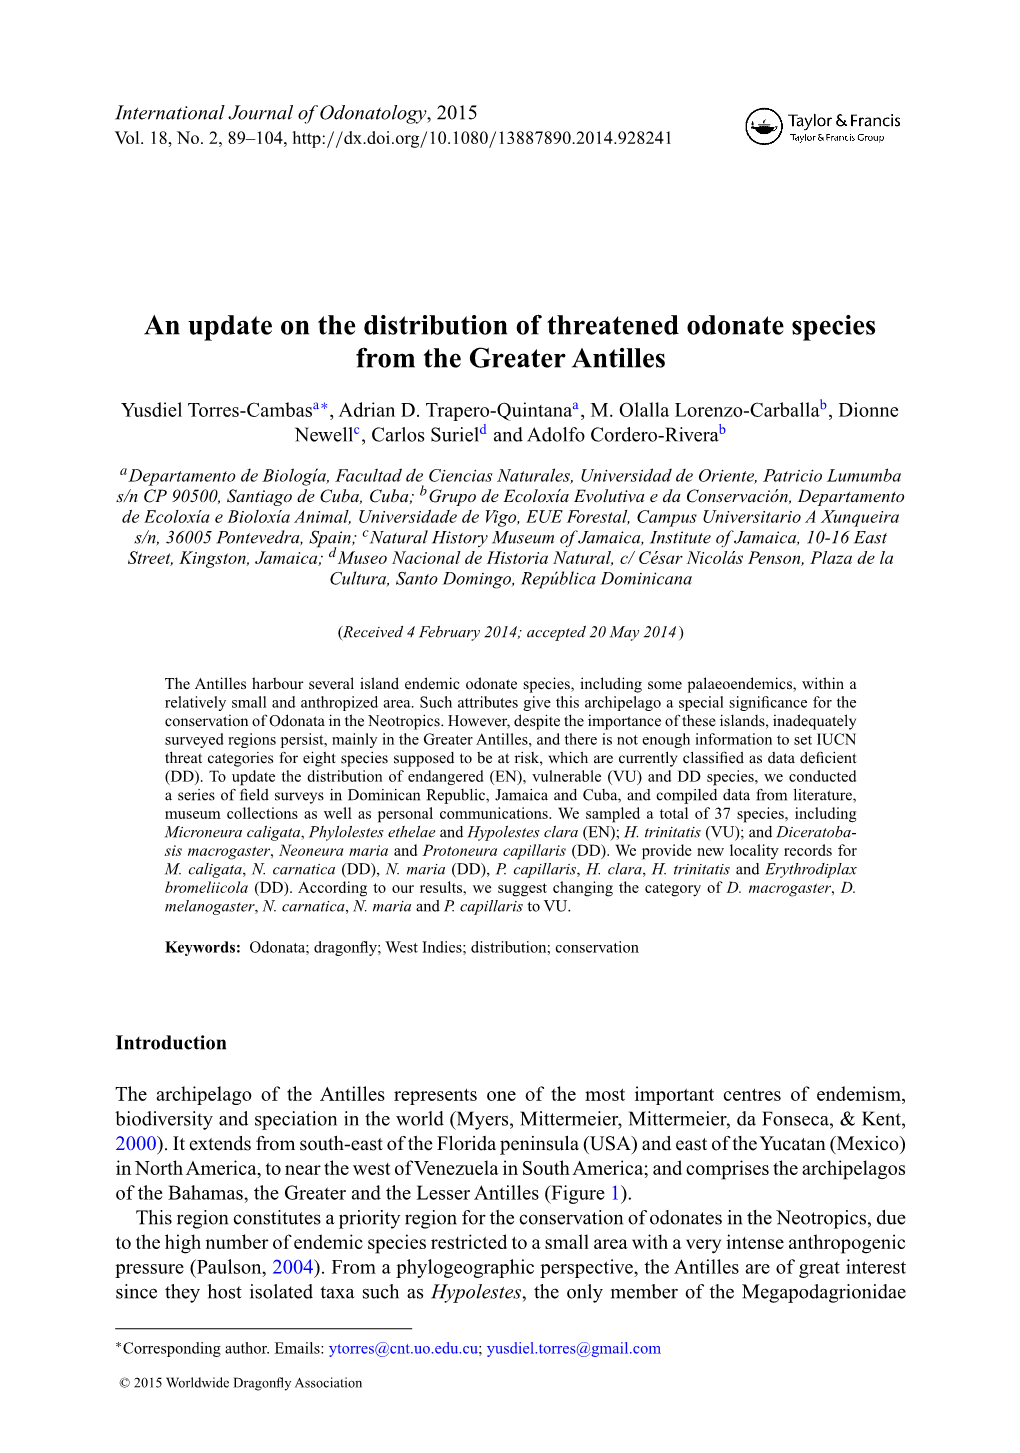 An Update on the Distribution of Threatened Odonate Species from the Greater Antilles